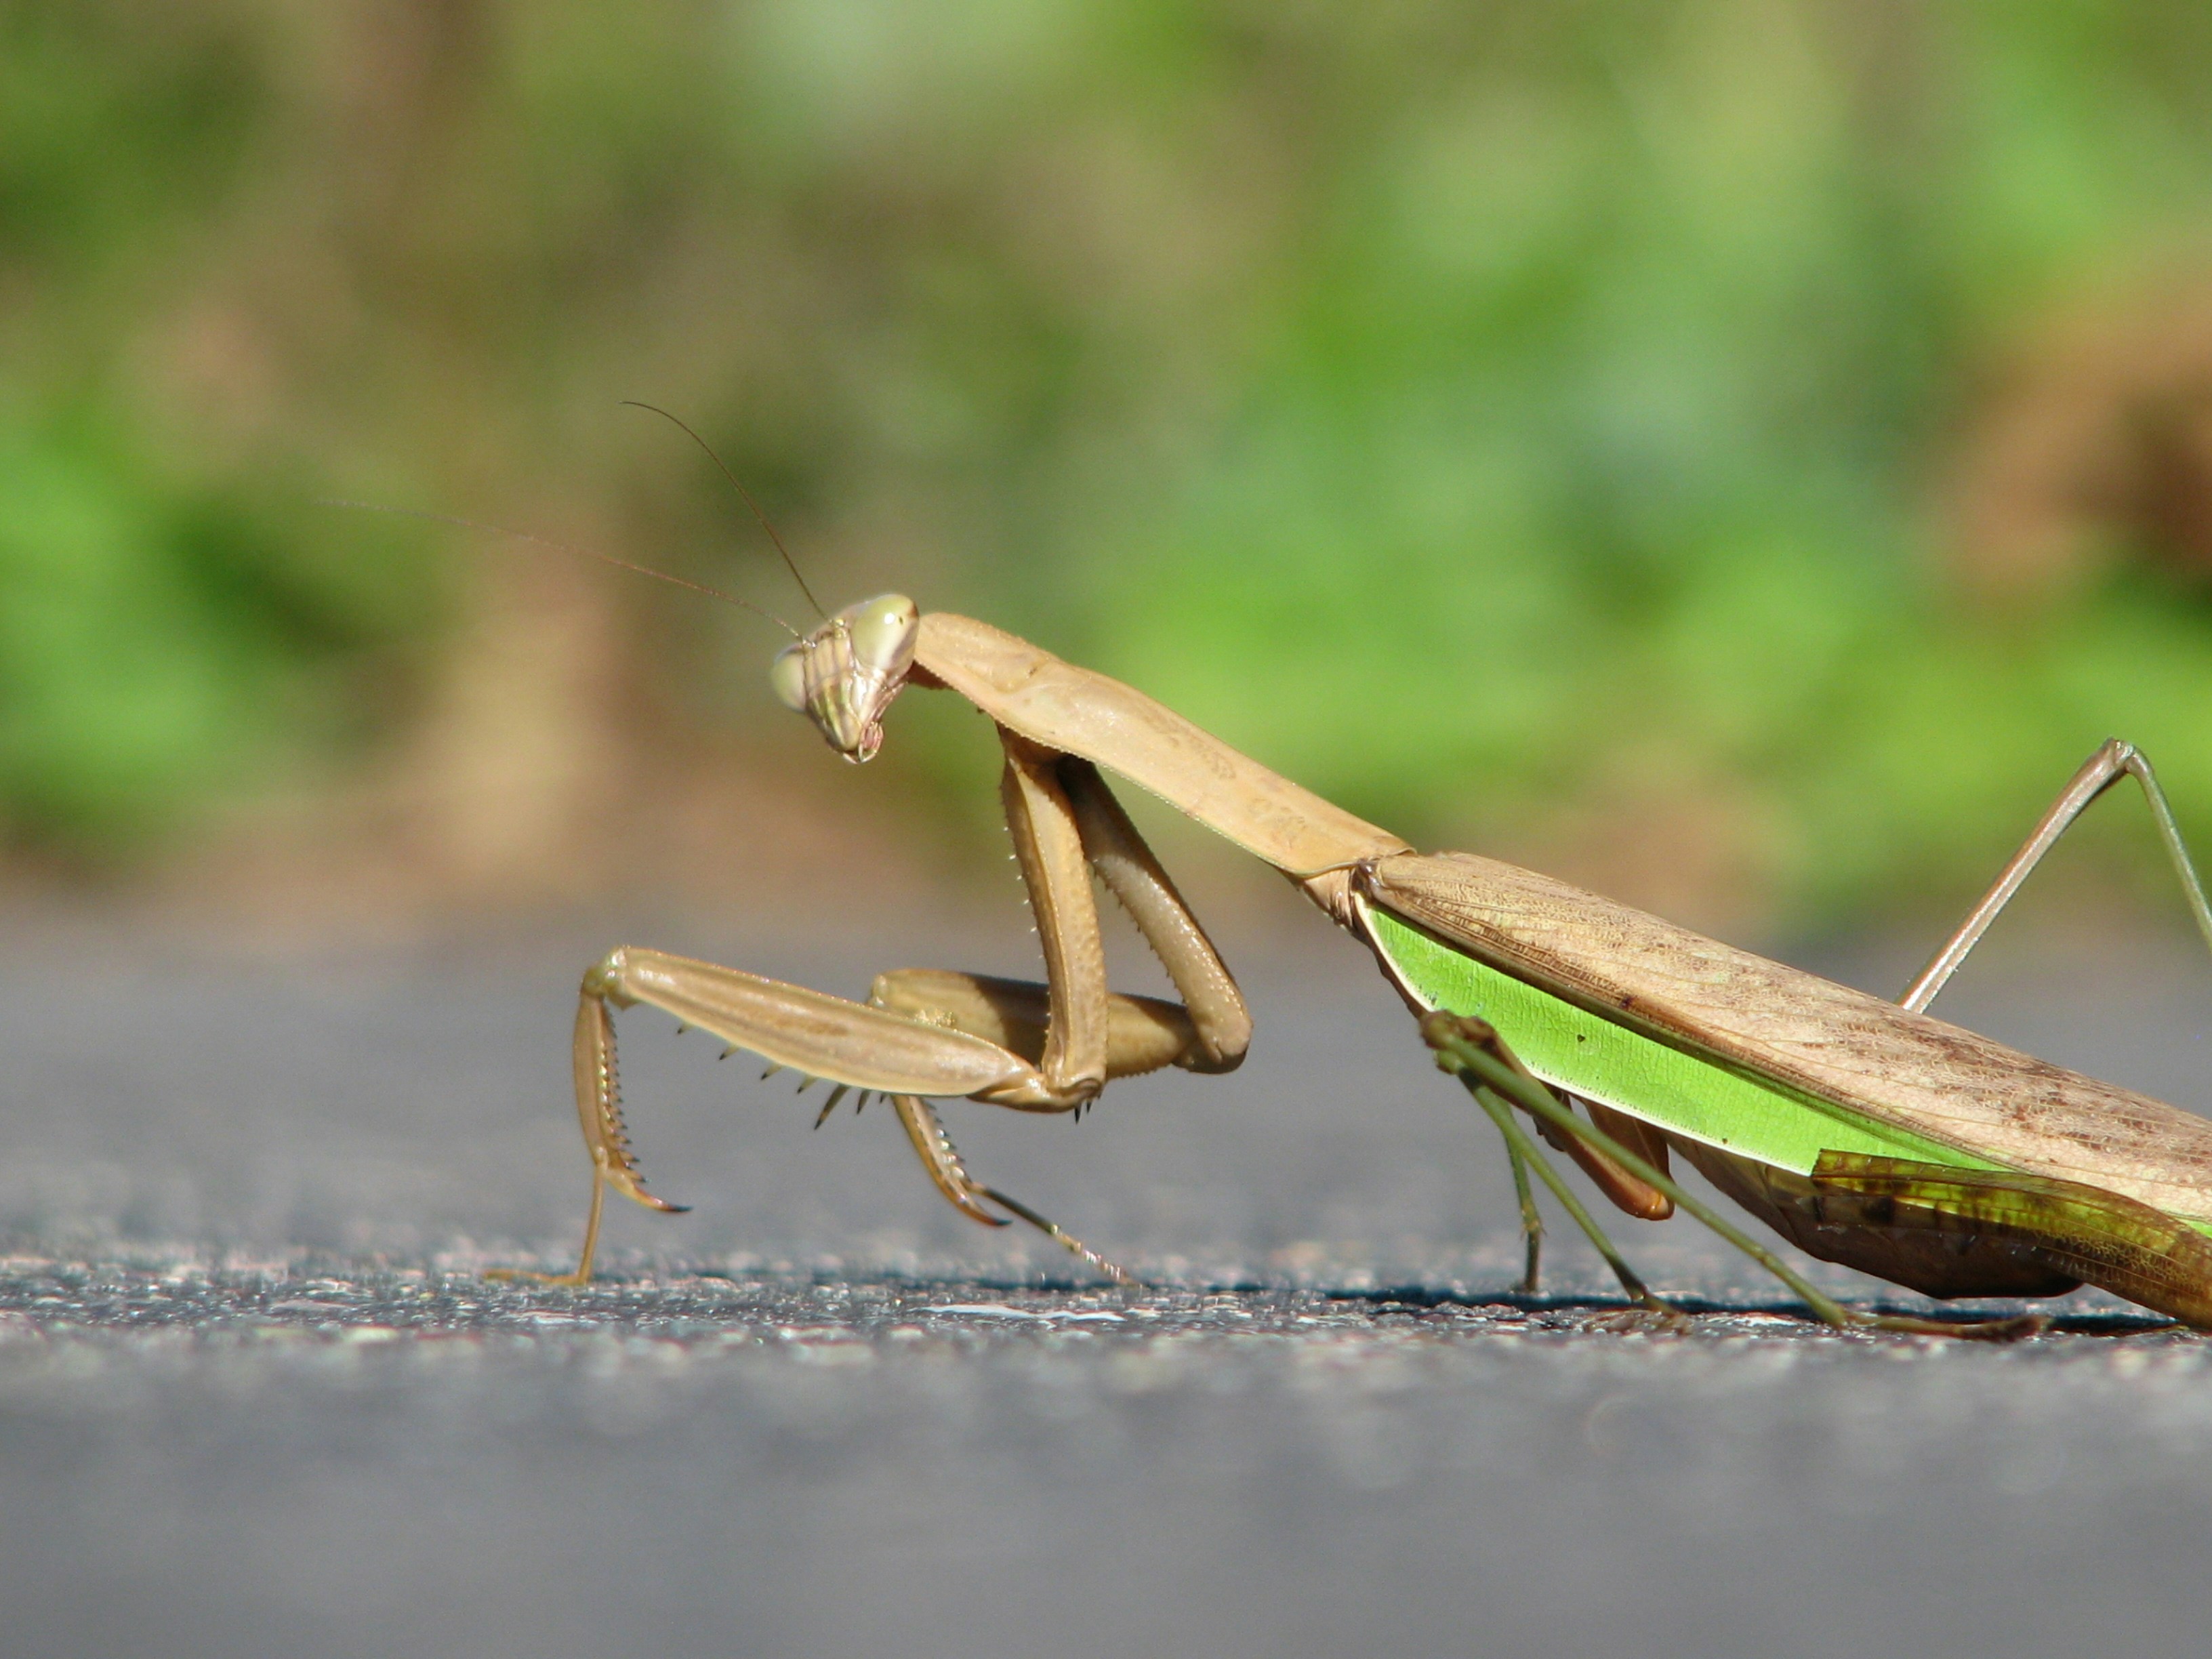 My little ones were playing on the driveway when I spotted this praying mantis soaking up the sun.  He seemed to pose for me!